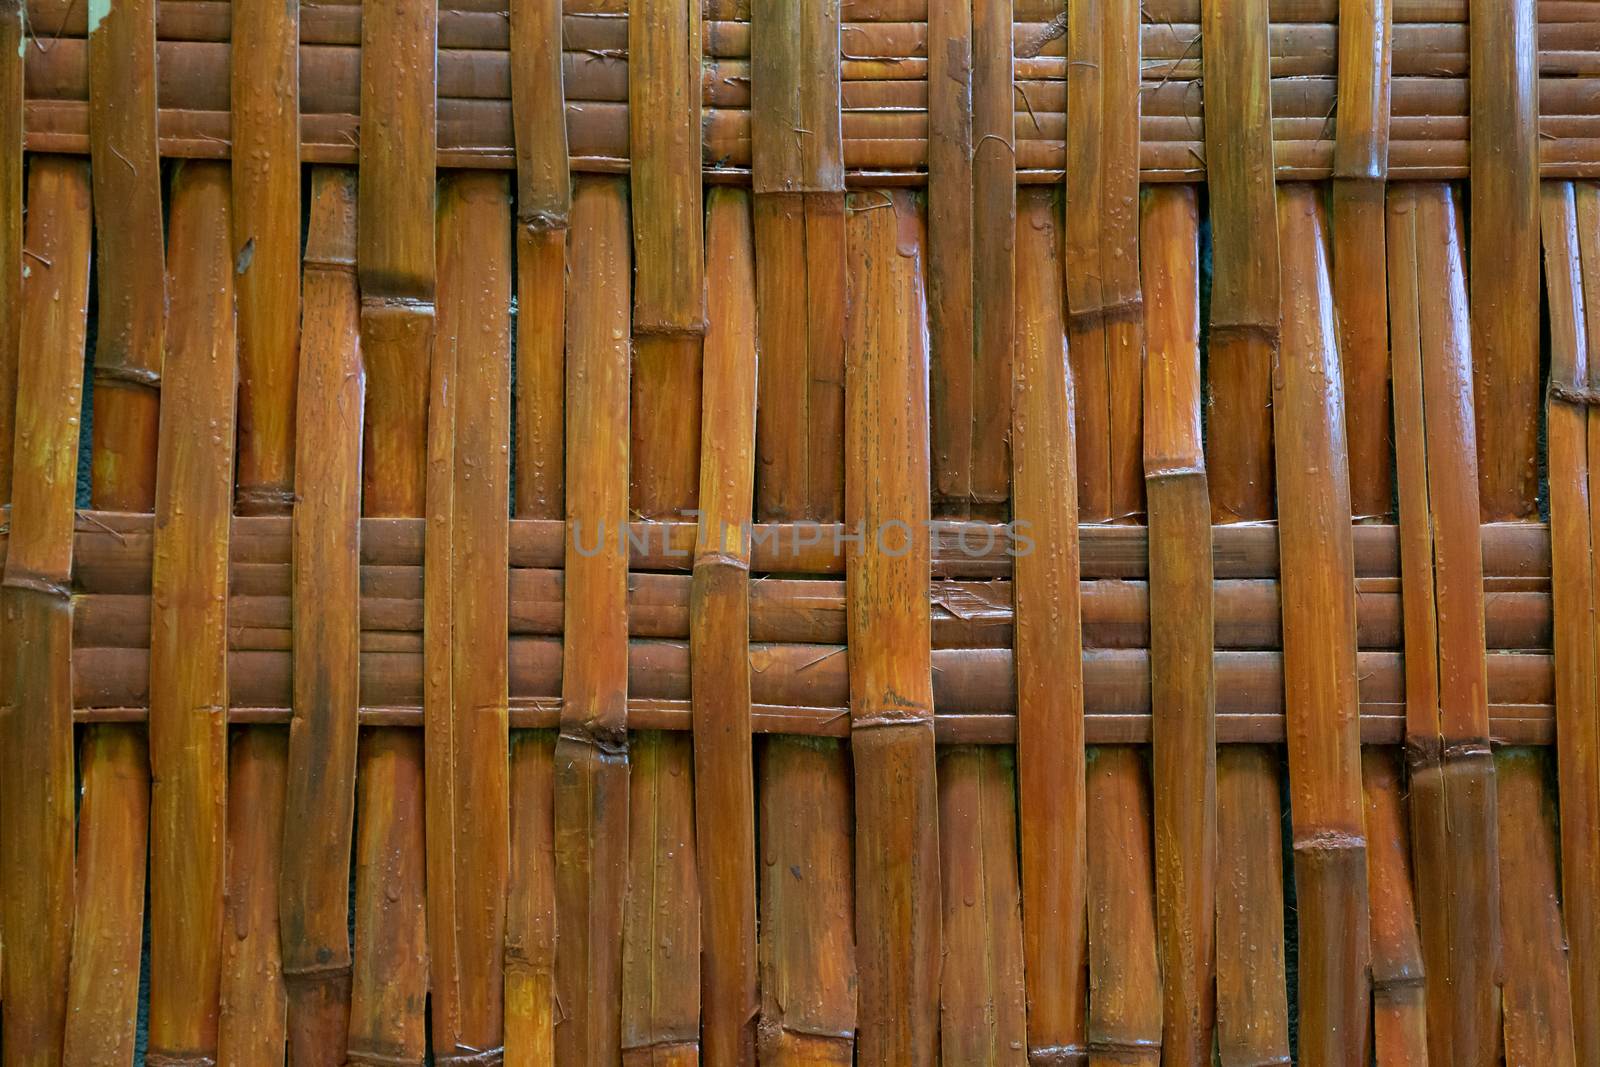 A Background from a wooden mesh or wood